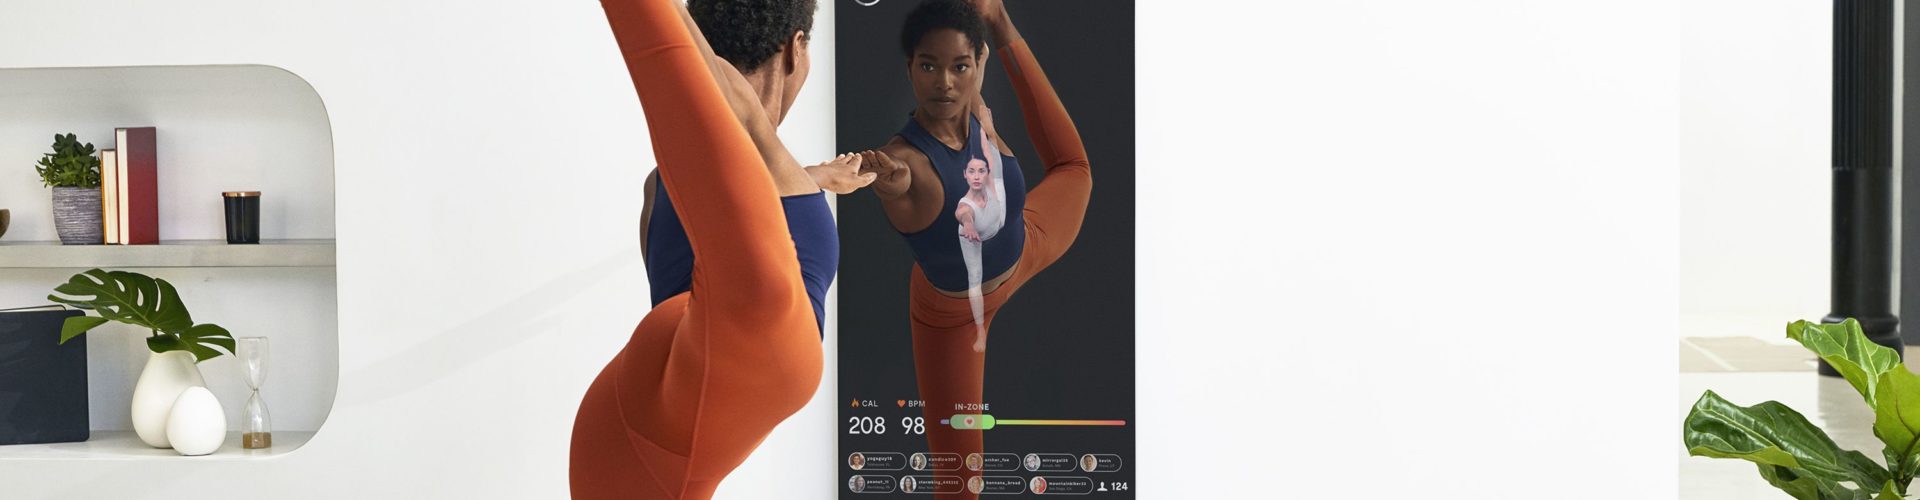 Peloton VS Mirror – What’s the Real Cost of Getting in Shape at Home?